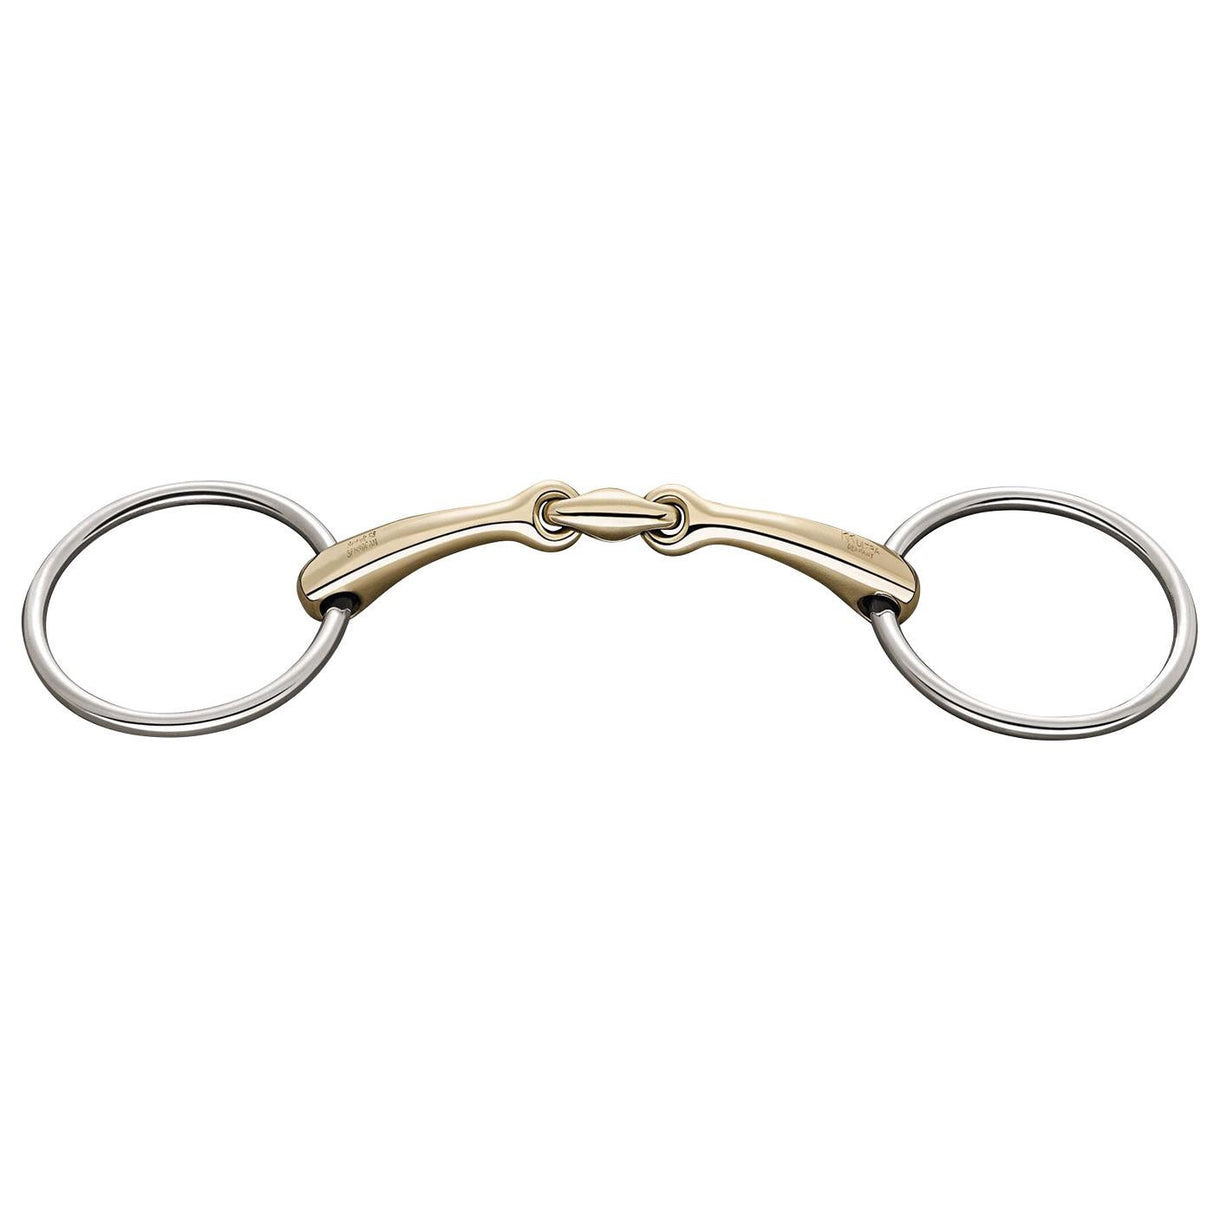 Sprenger Dynamic RS Loose Ring Double Jointed Snaffle Bit - 16 mm